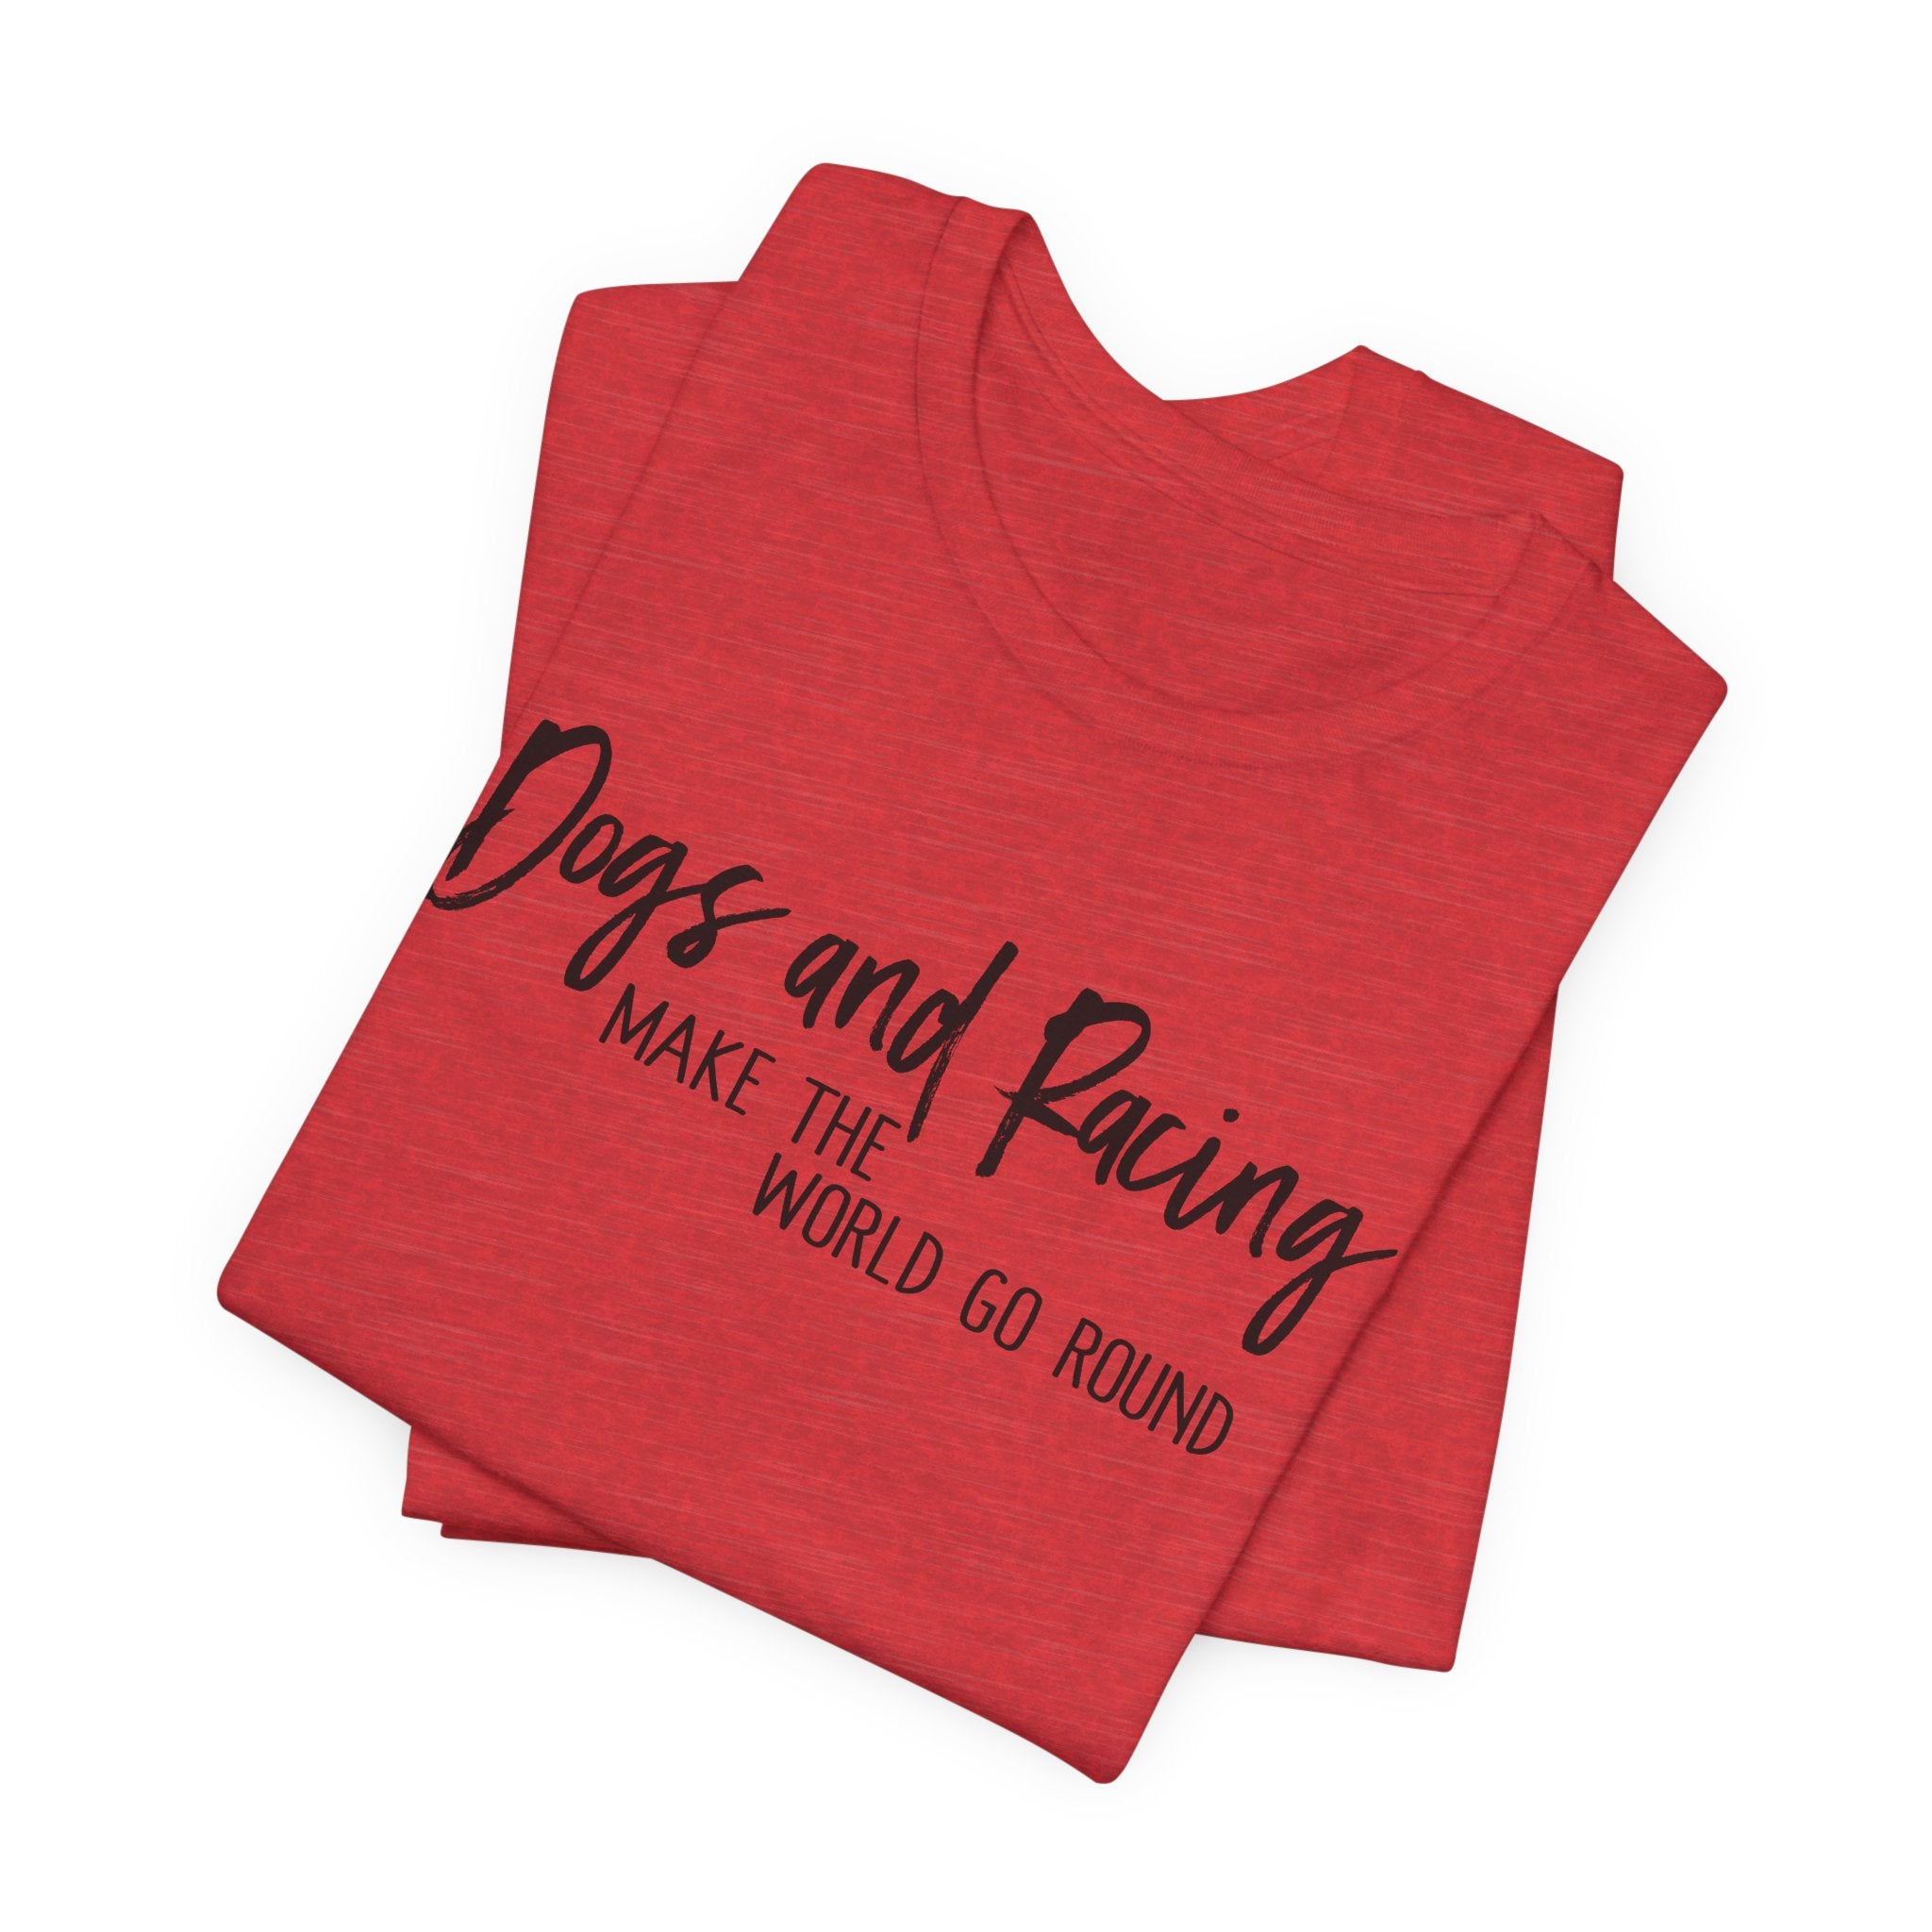 Dogs and Racing Make the World Go Round Unisex Raceday T-Shirt for Racing Ladies